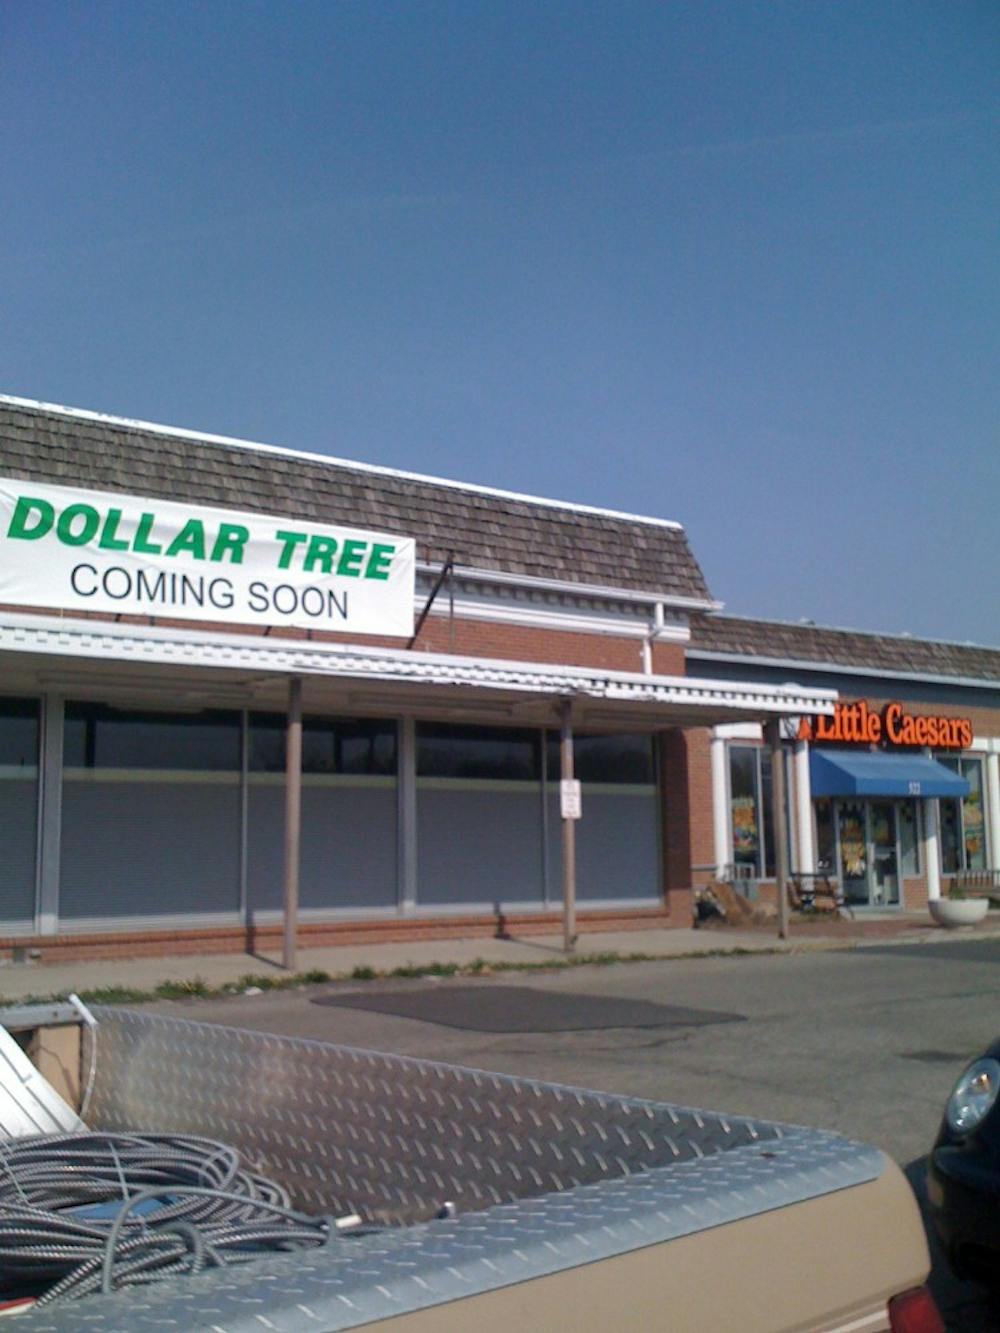 Oxford residents will soon be able to shop at Dollar Tree. The new store is being built on Locust Street and is expected to open late May or early June. The chain expects to target its core customers, married females with children and an income of about $50,000 to $60,000.